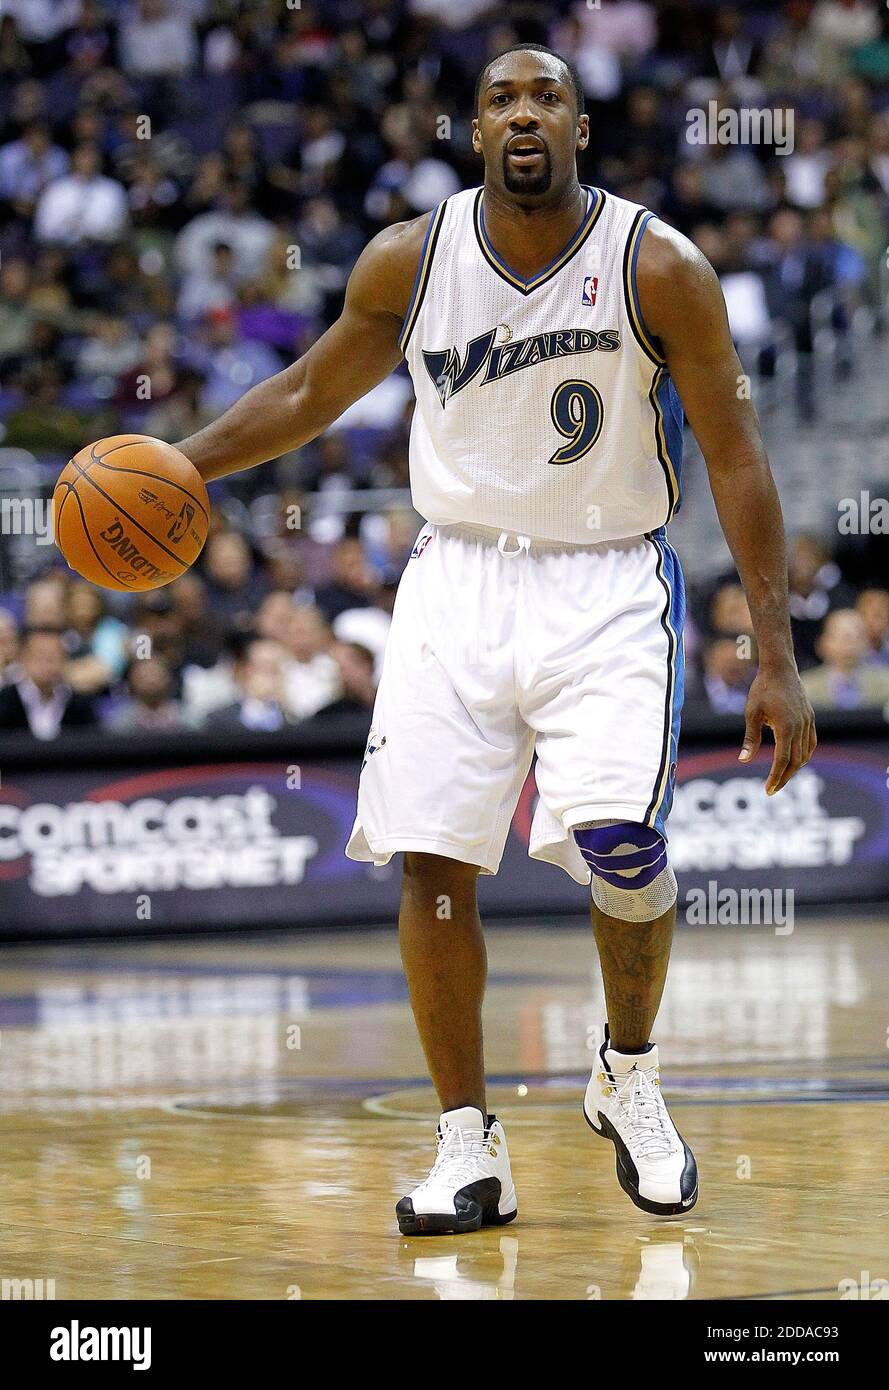 Gilbert Arenas, Caron Butler, Antawn Jamison to be honored by Wizards - The  Washington Post